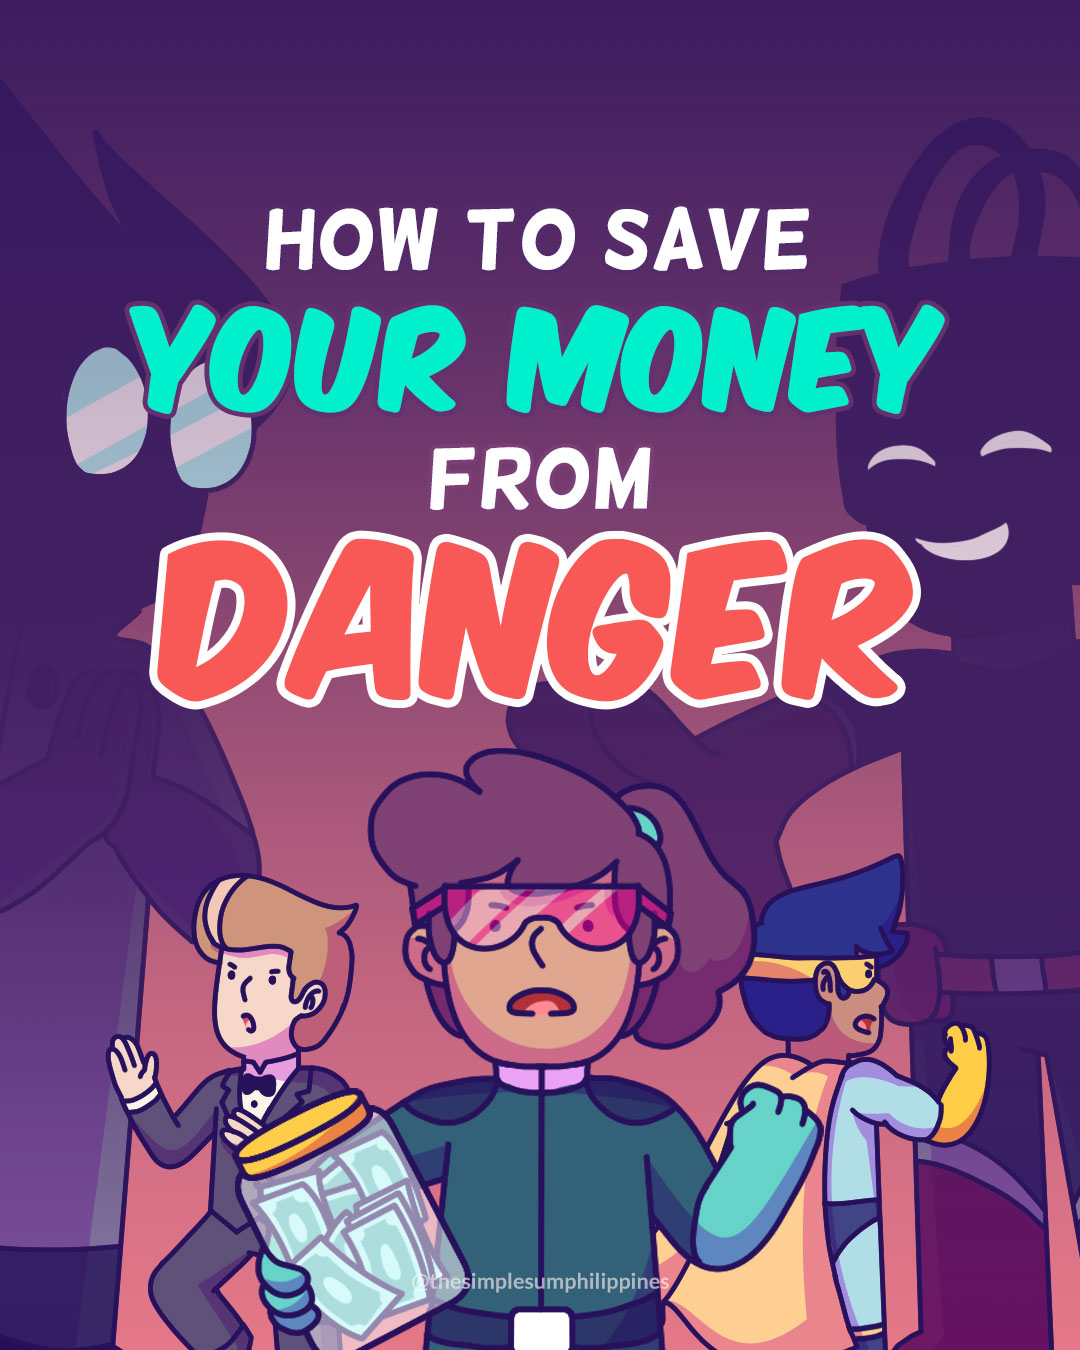 How to save your money from danger